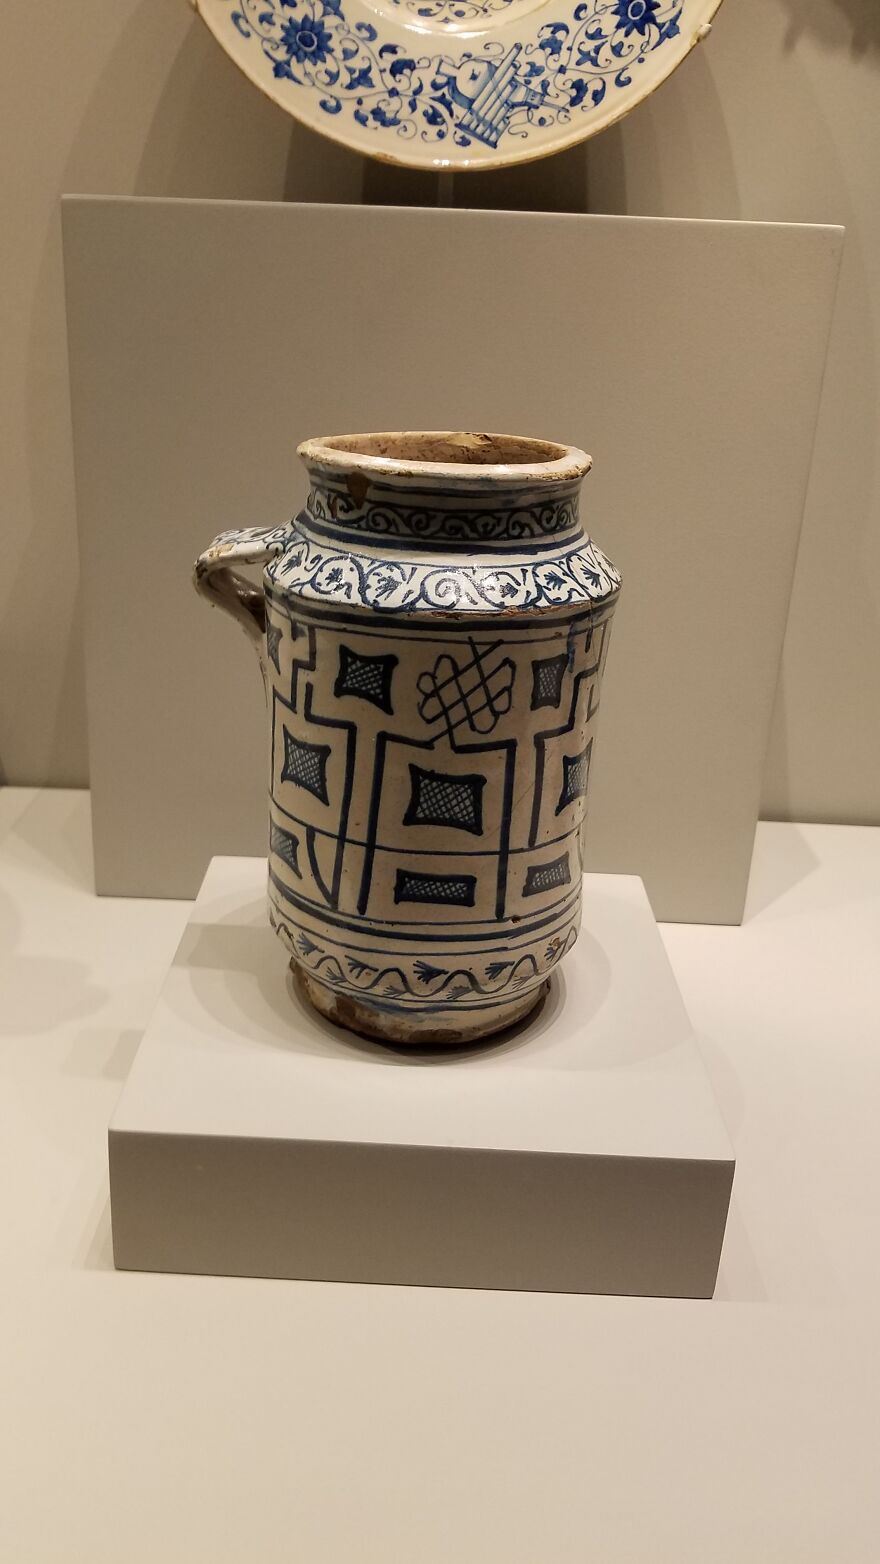 Cool Old Mug/Jug From... The Getty Museum?